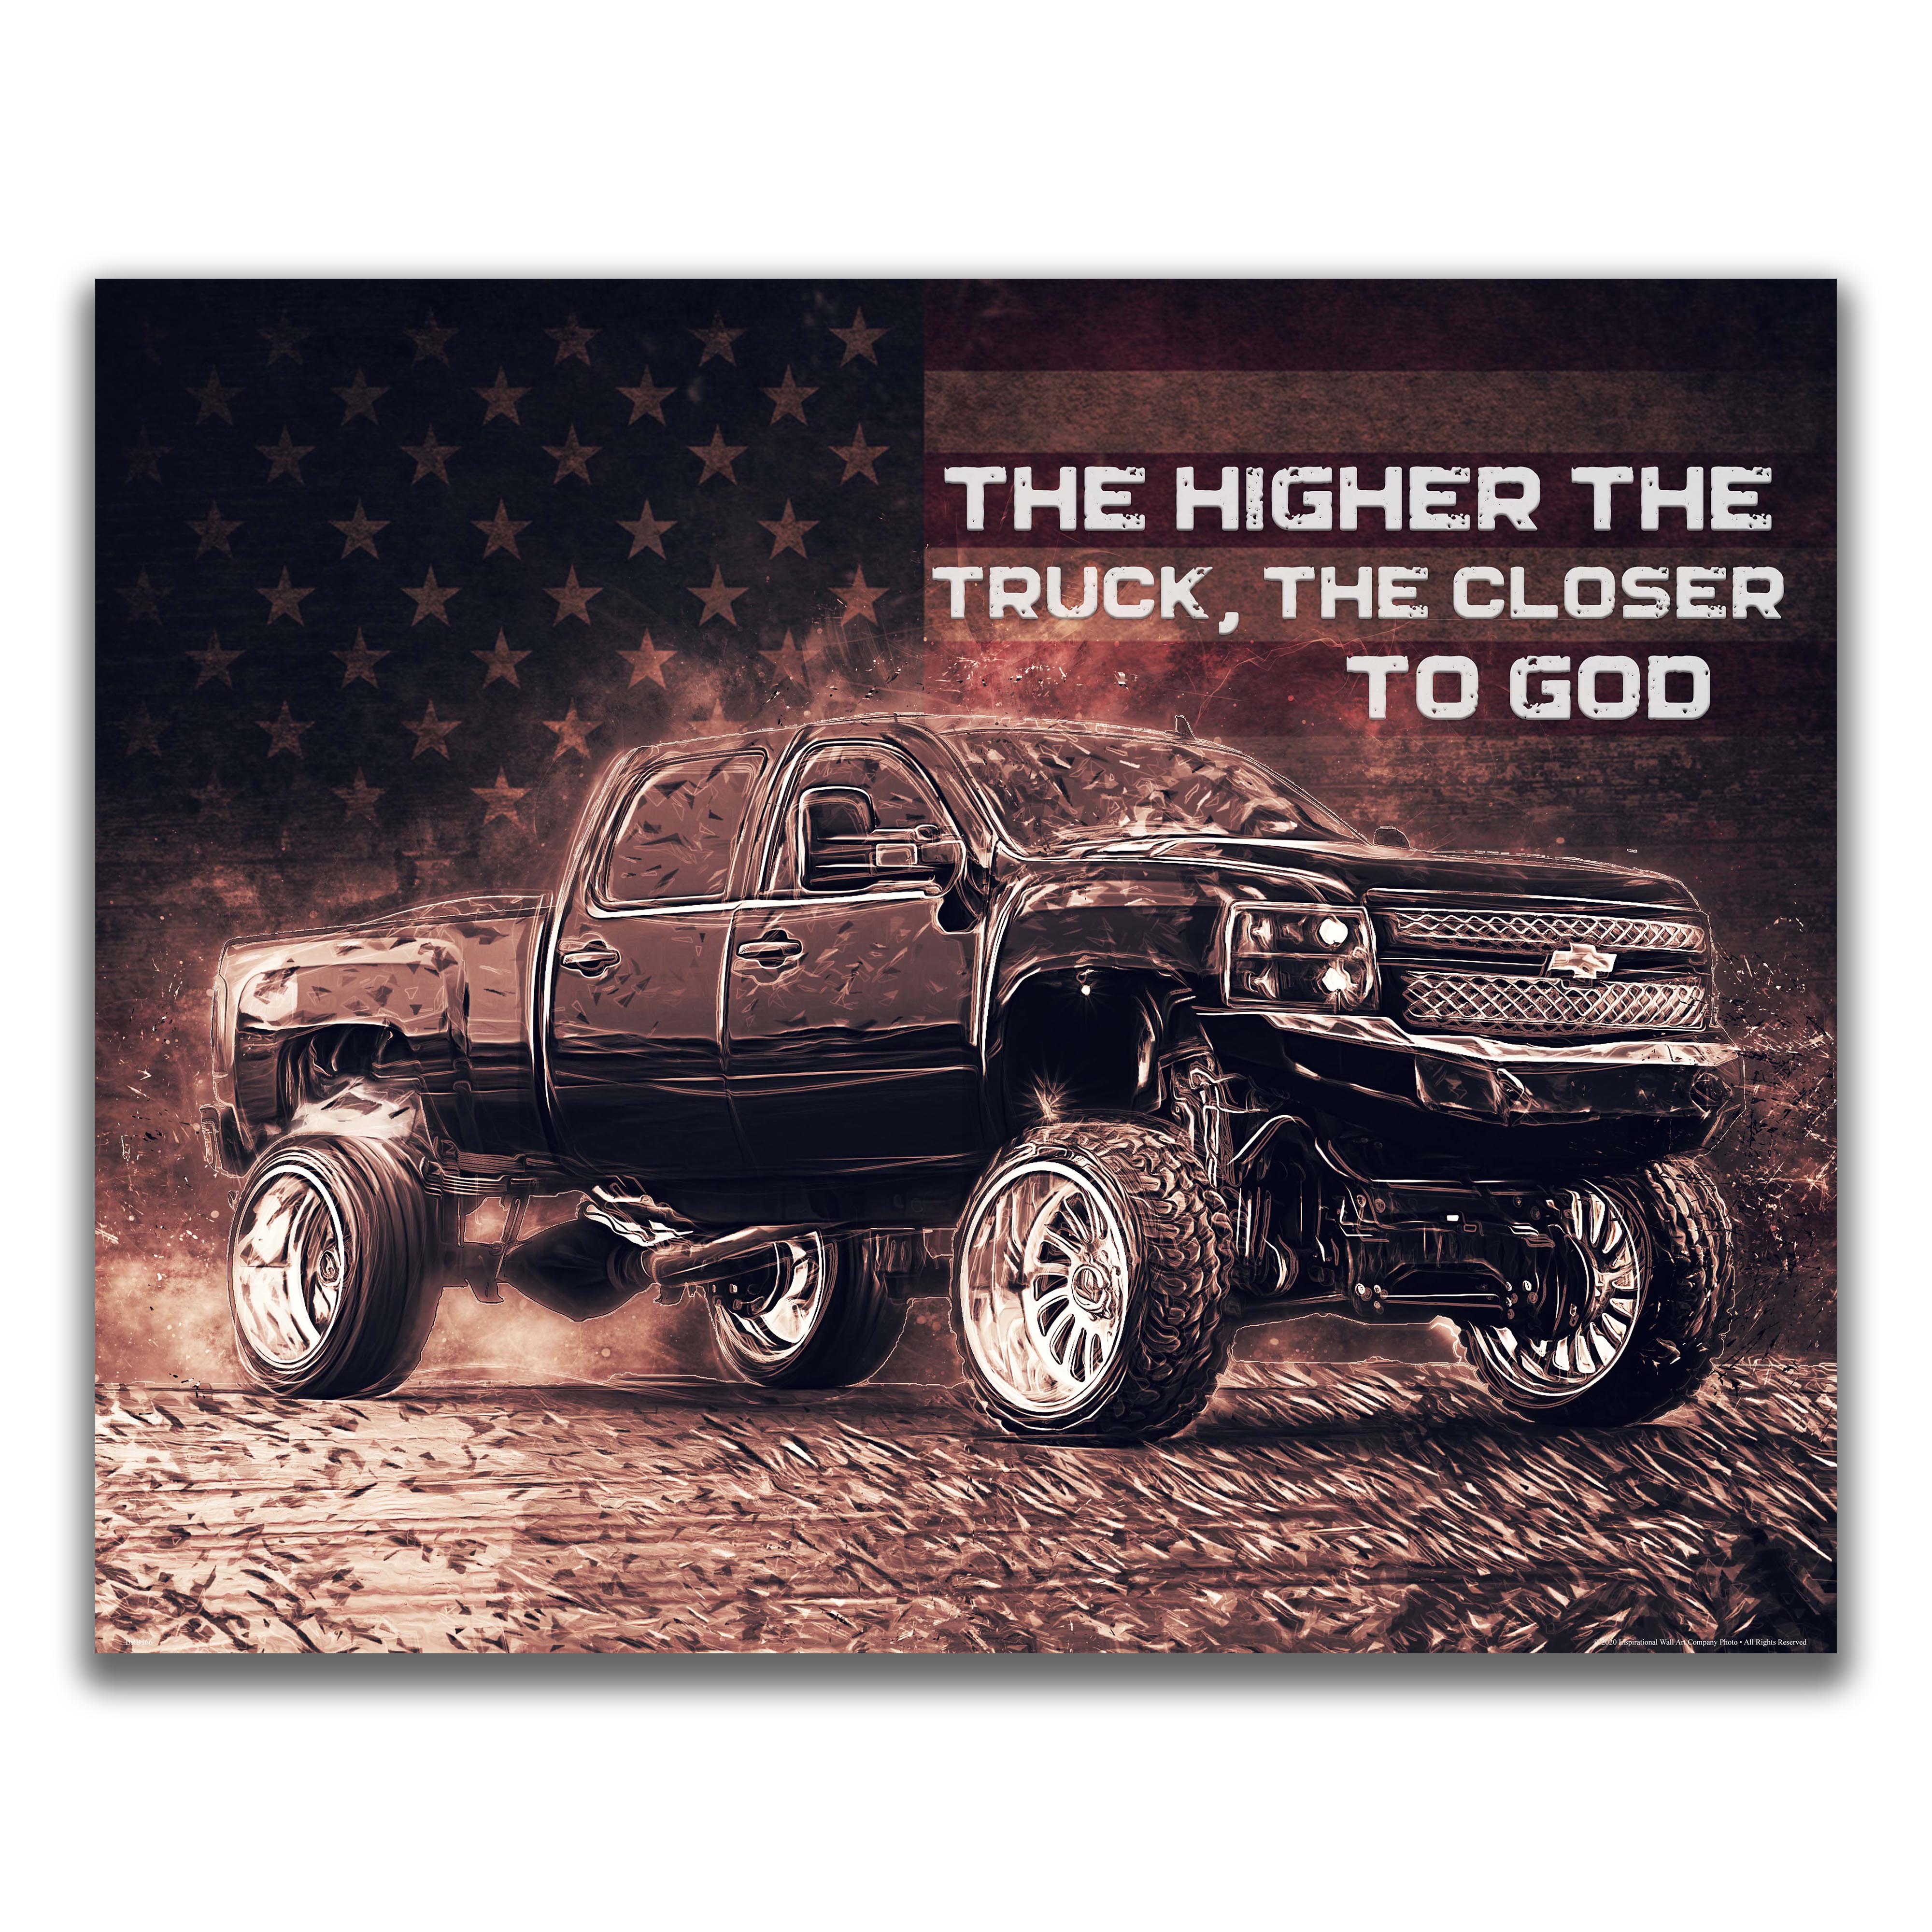 Higher The Truck The Closer to God - Truck Poster